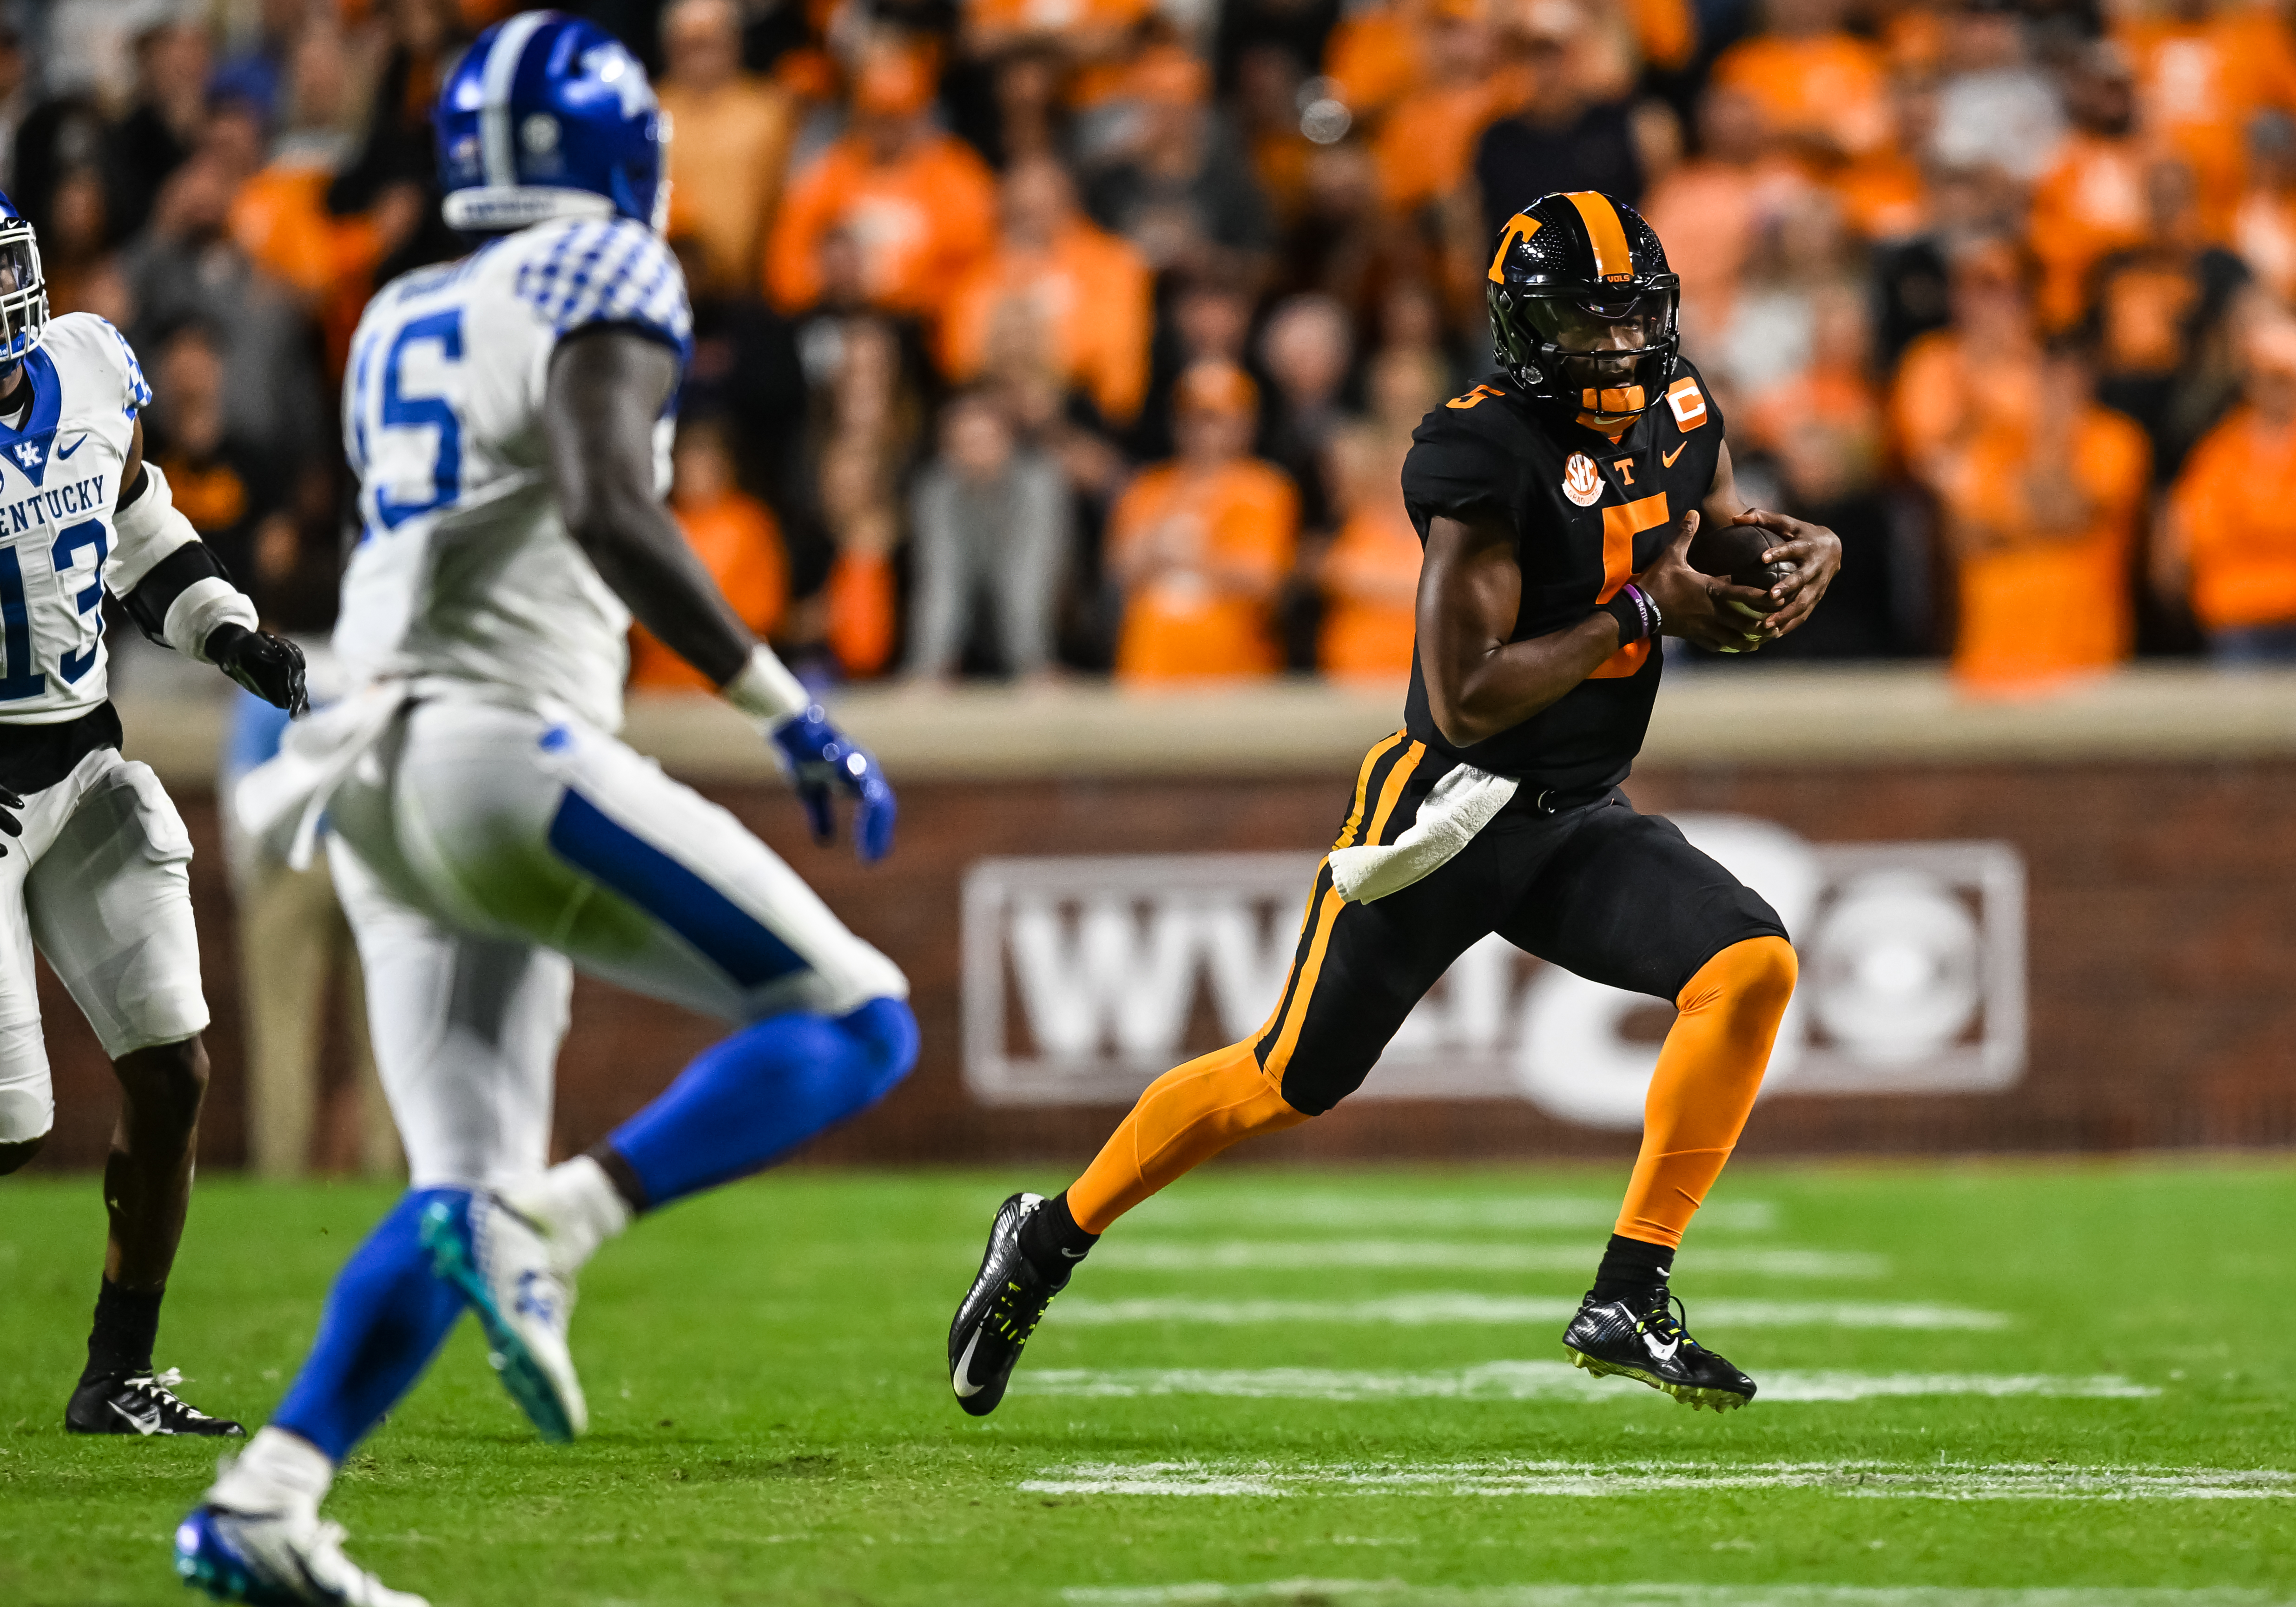 COLLEGE FOOTBALL: OCT 29 Kentucky at Tennessee